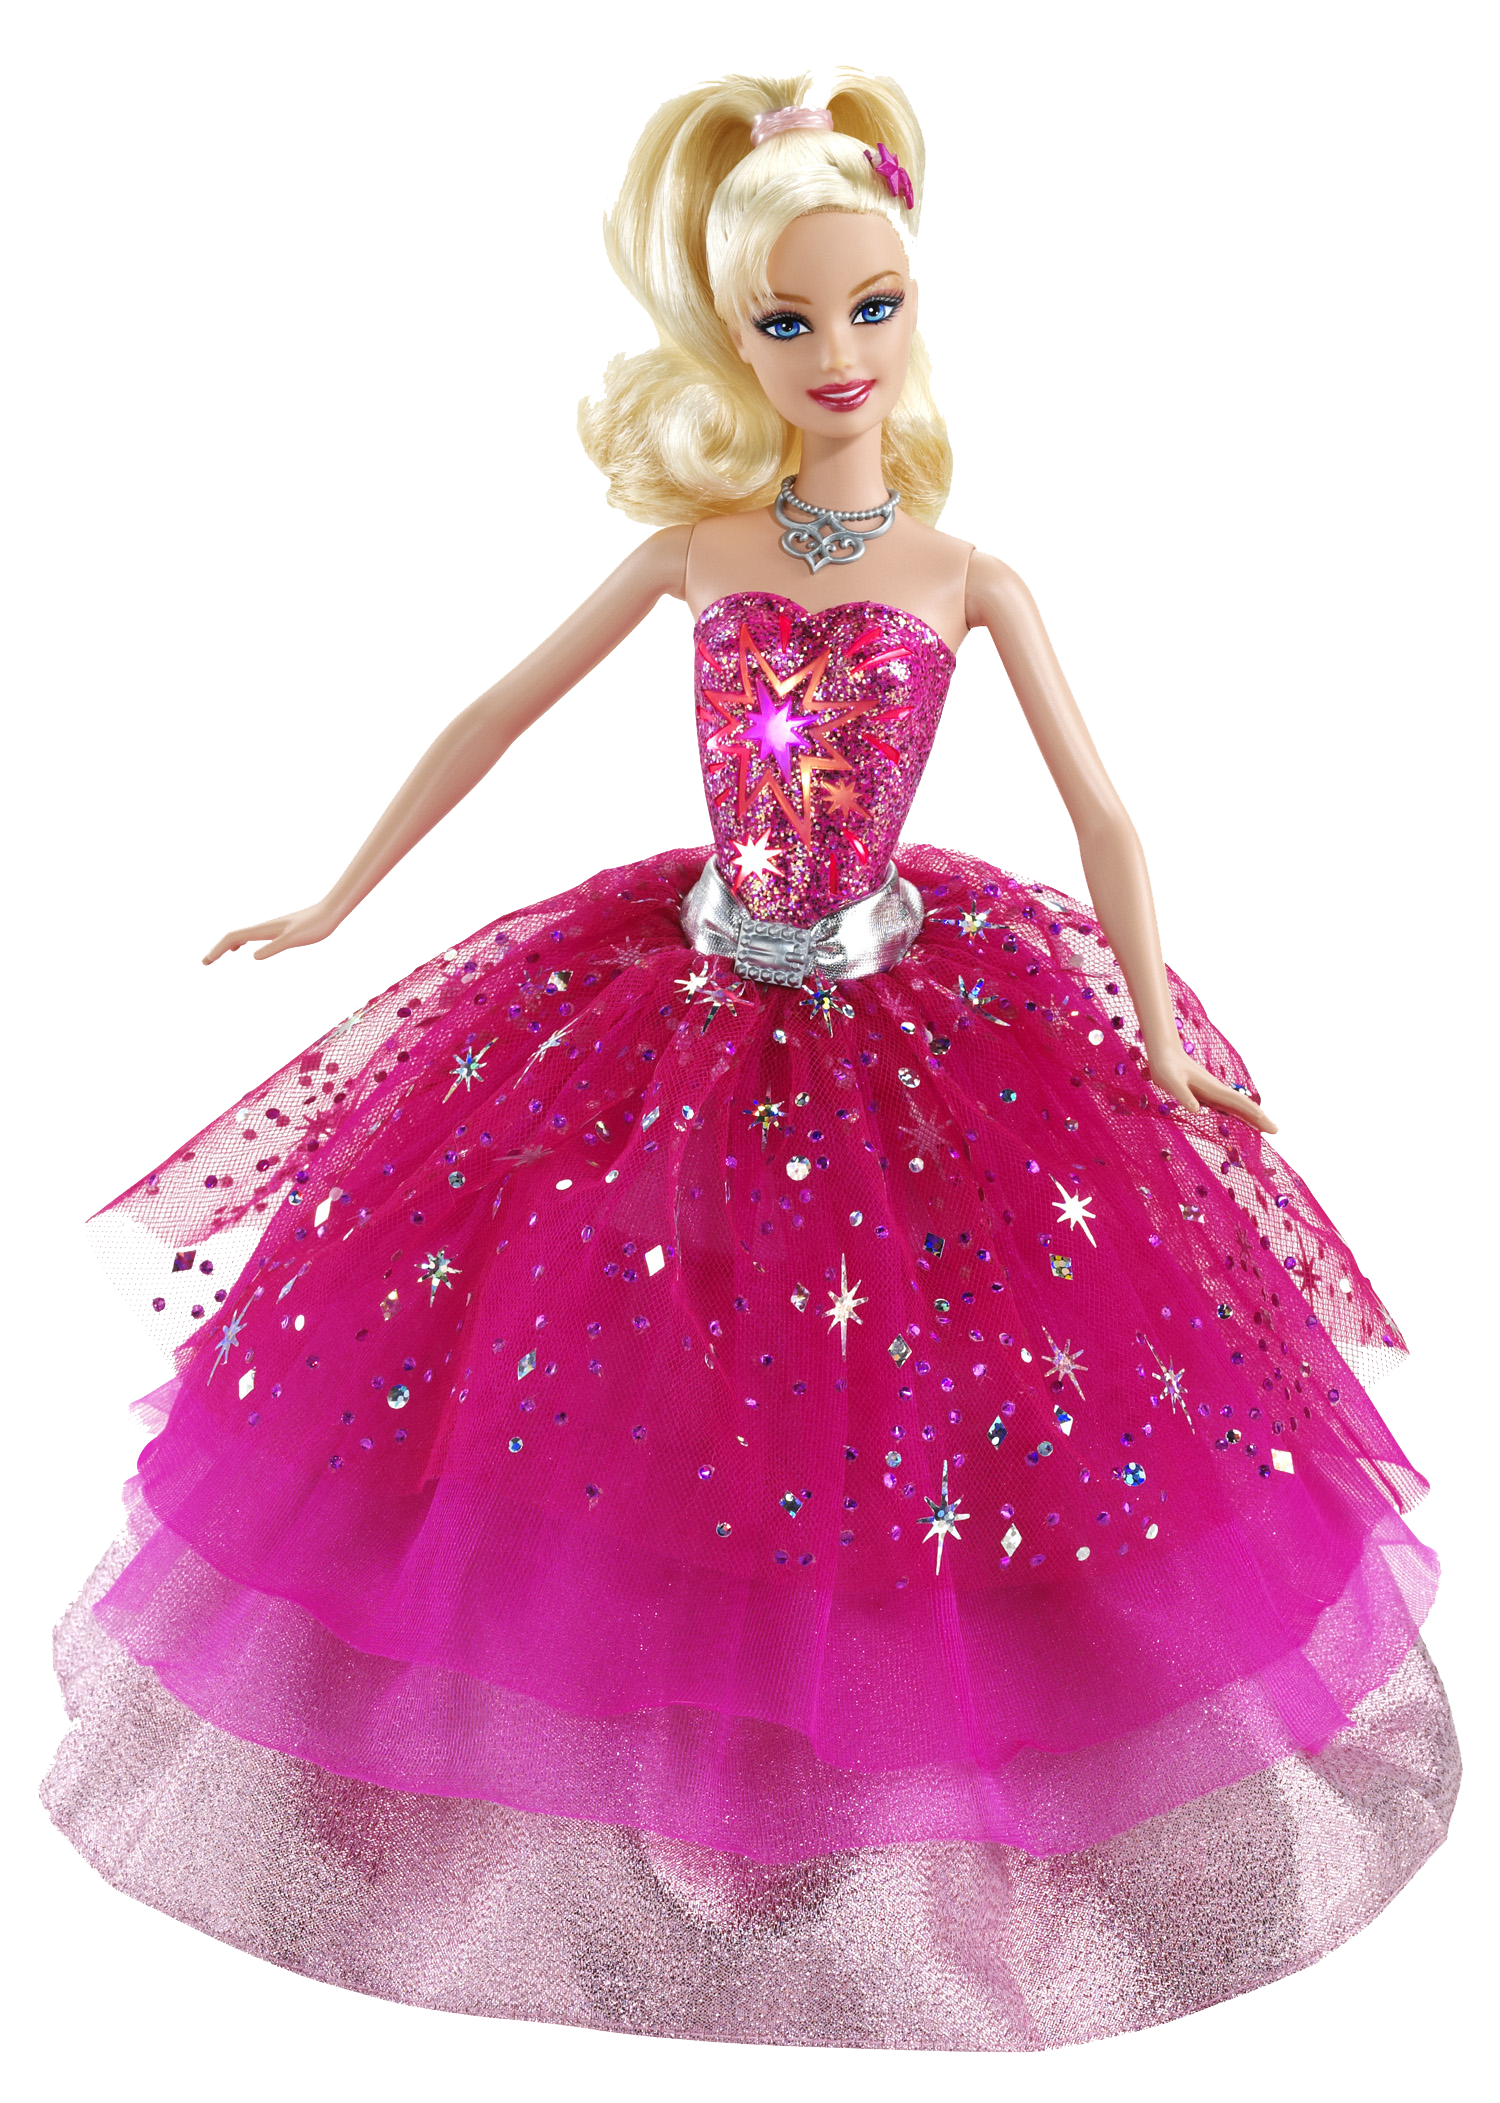 Download PNG image - Barbie Doll Princess Pink Gown PNG 